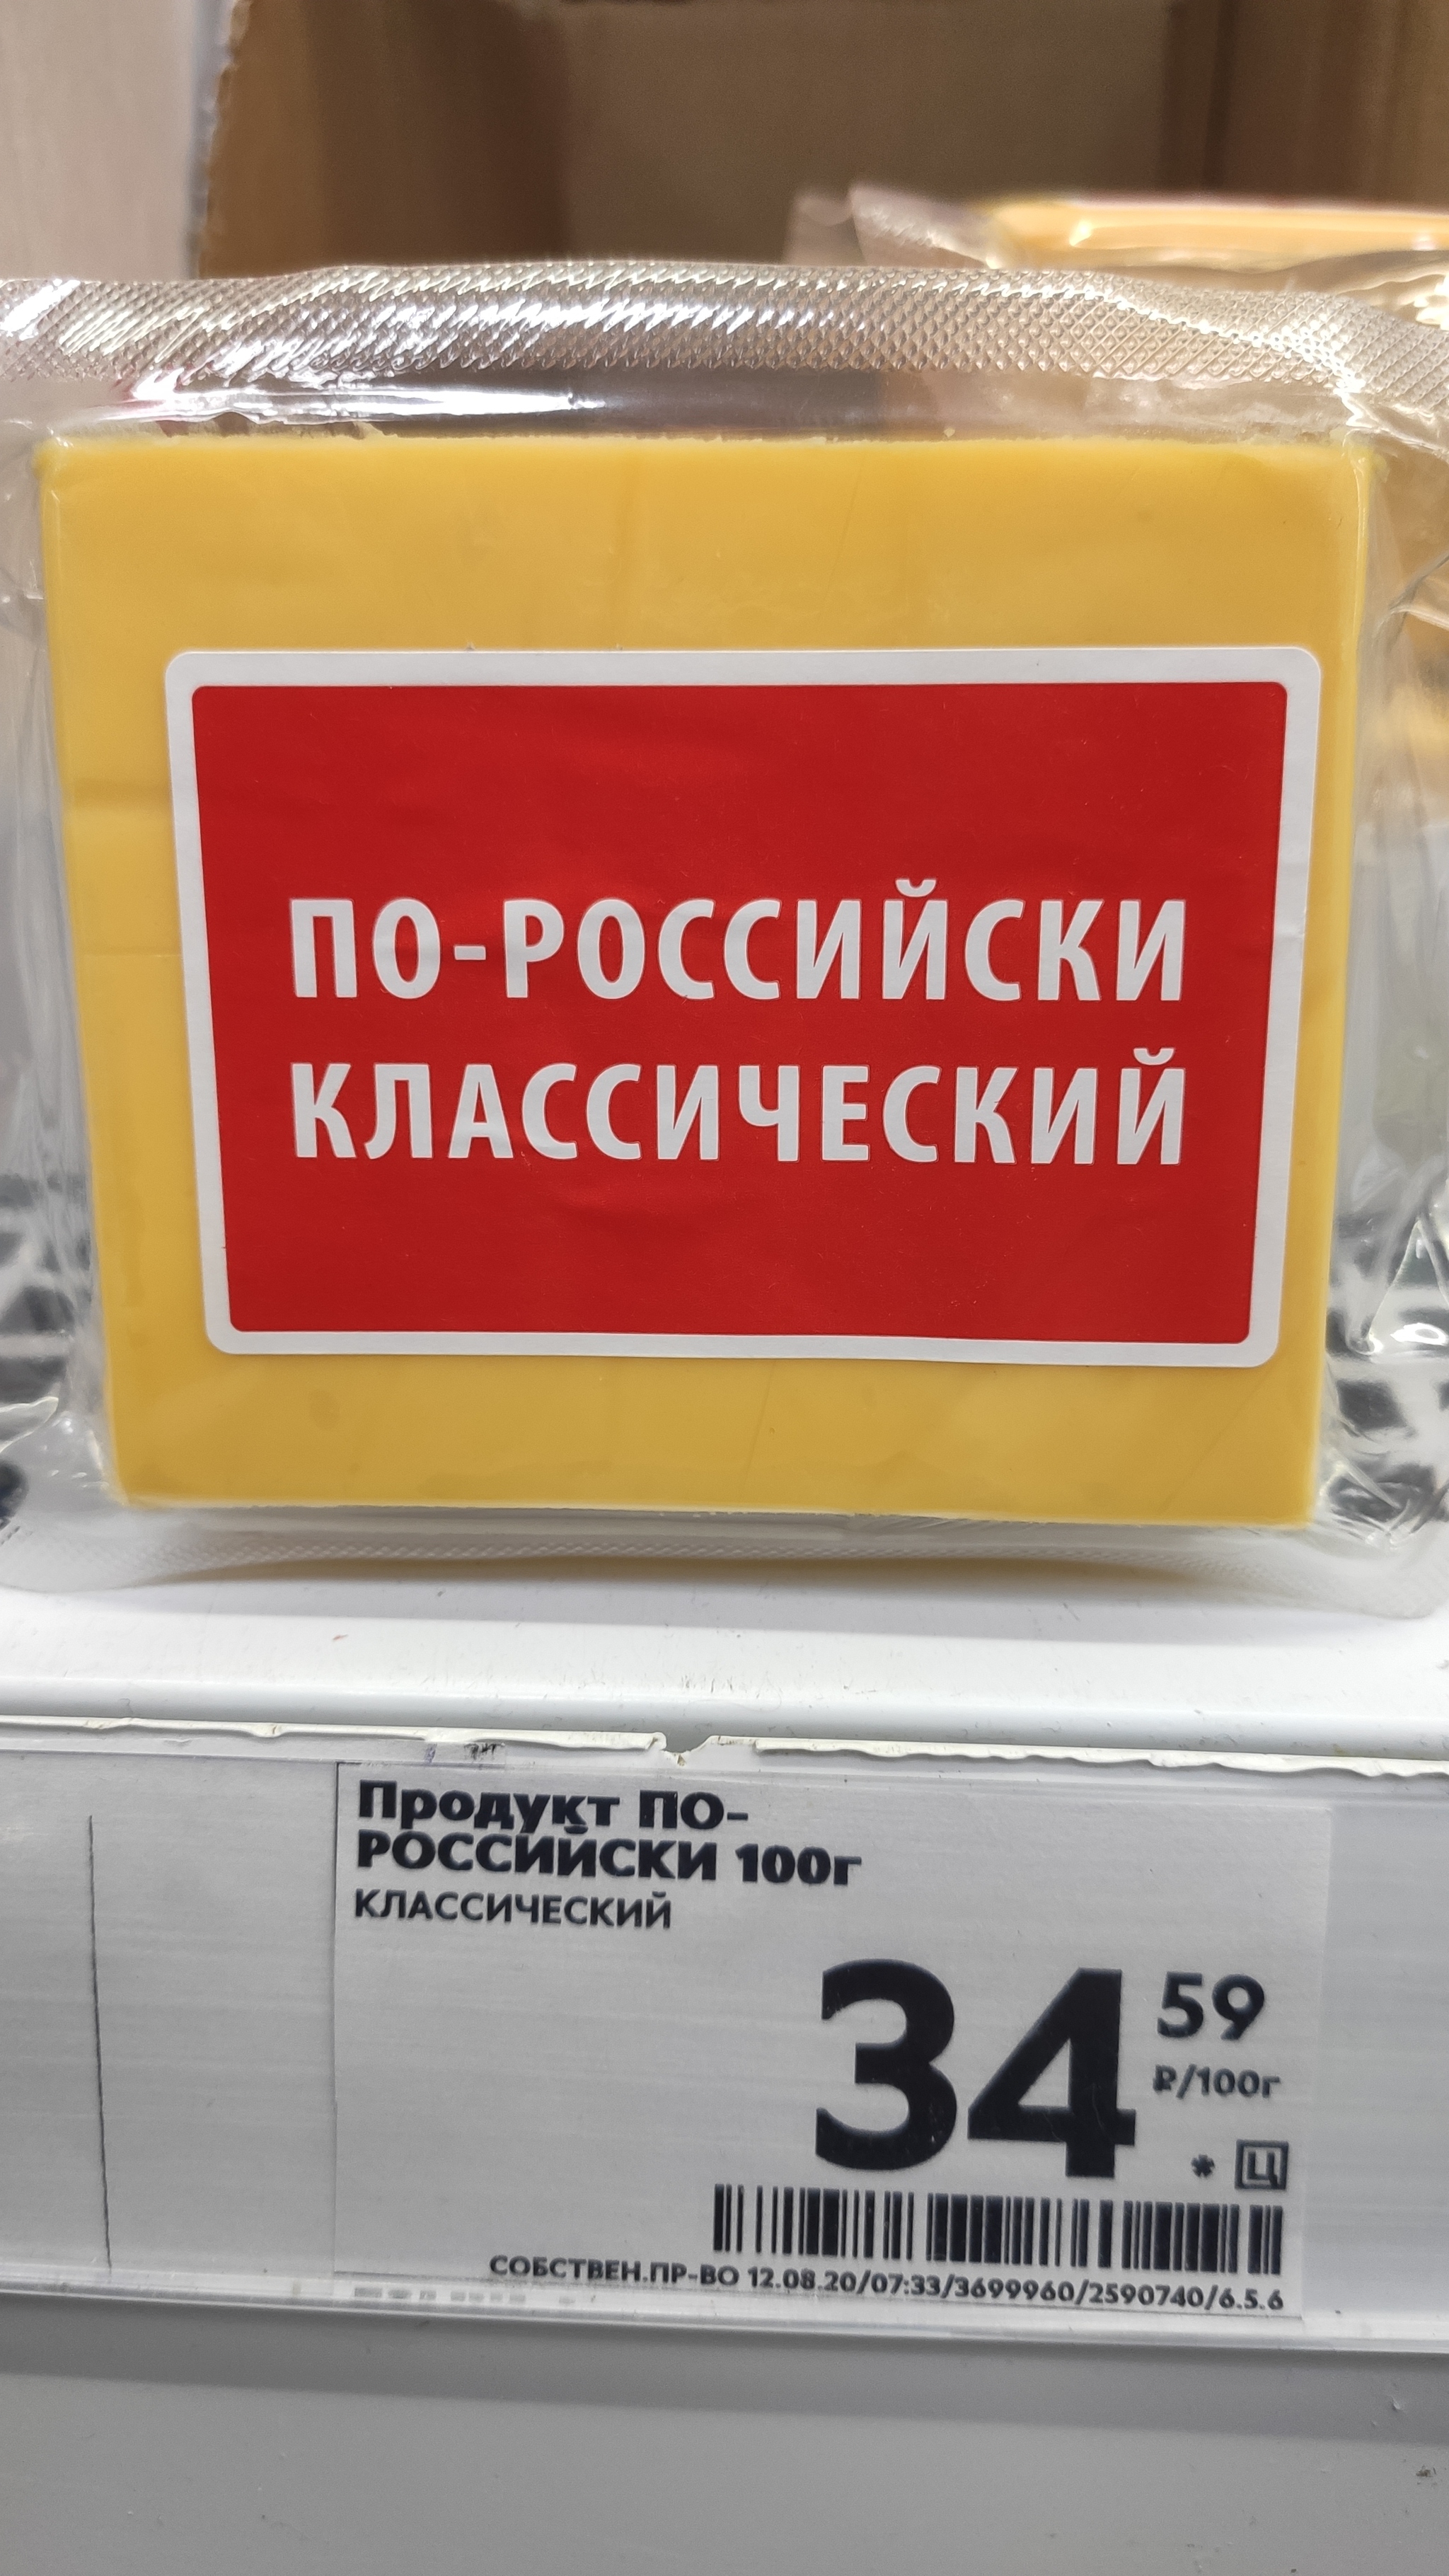 What do you call it in a store? - My, Pyaterochka, Products, Advertising, Score, Tag for beauty, Name